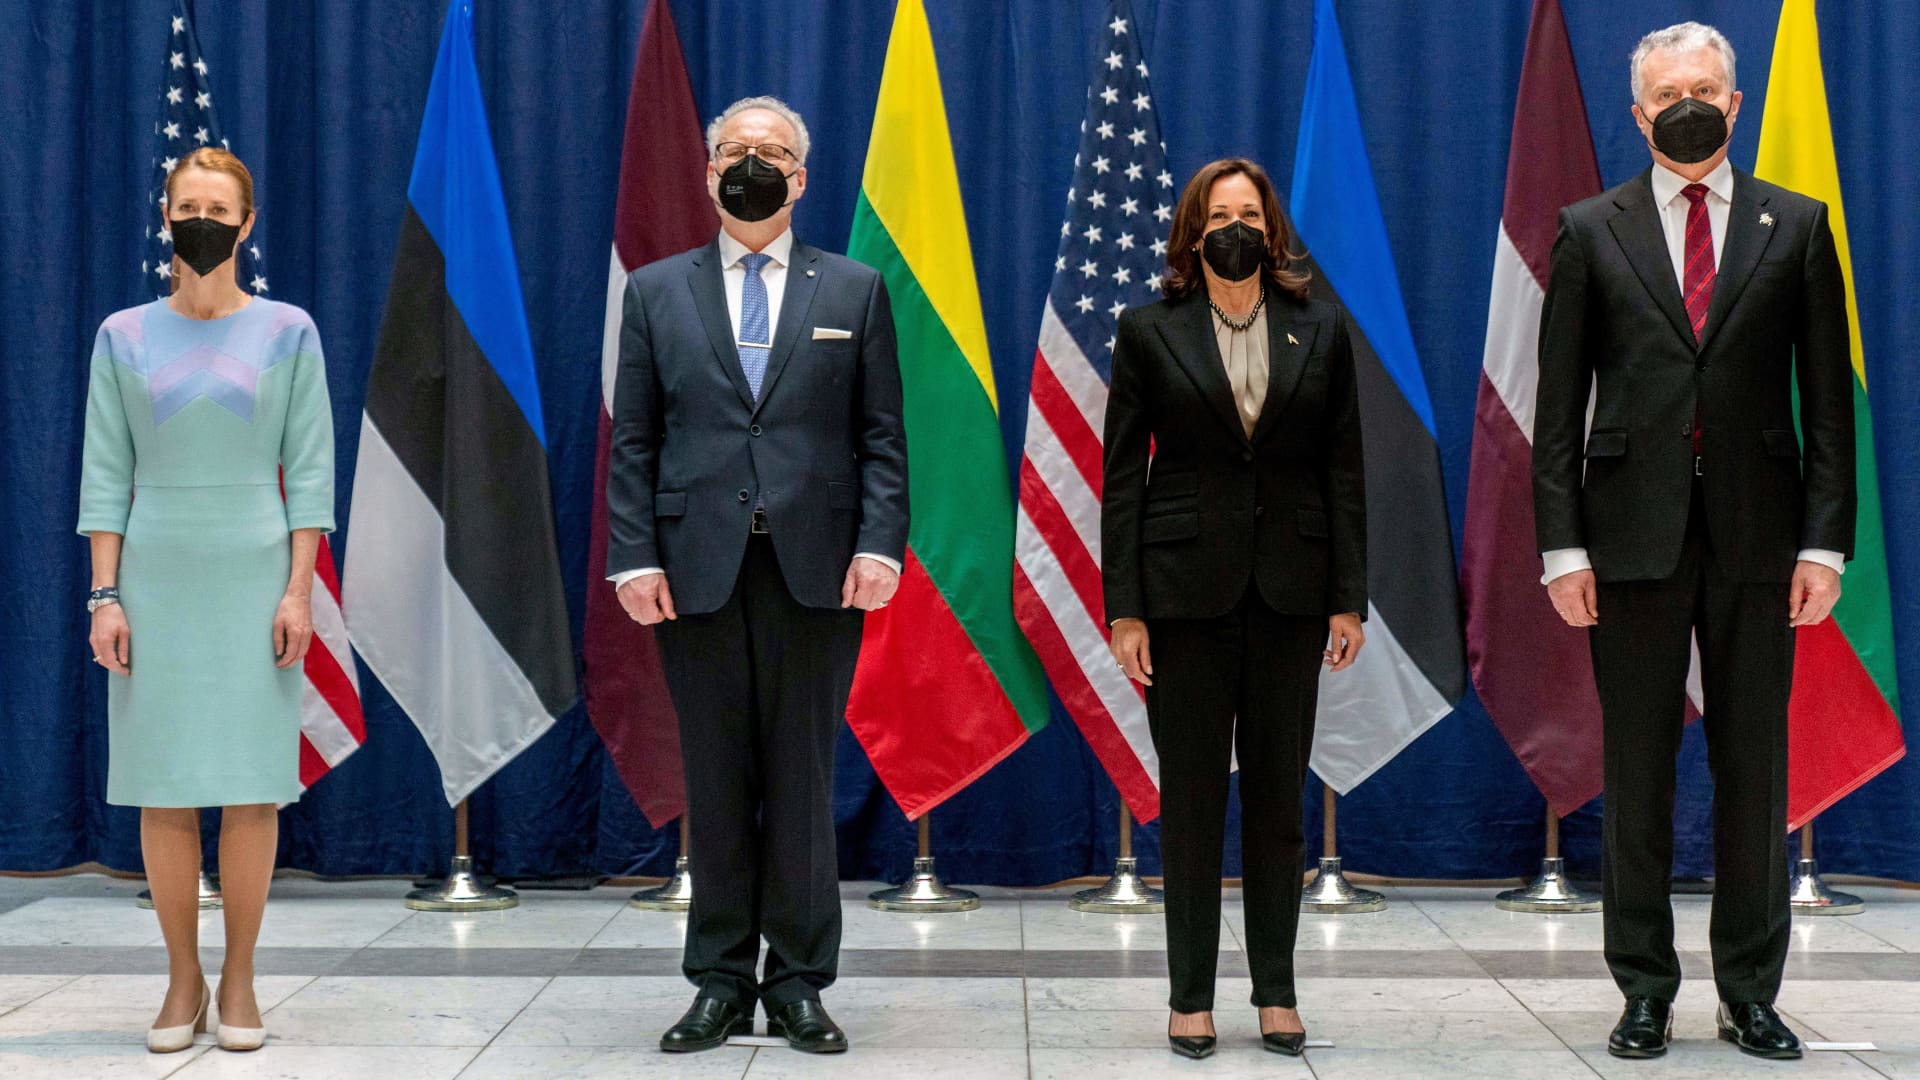 (LtoR) Estonian Prime Minister Kaja Kallas, Latvian President Egils Levits, US Vice President Kamala Harris and Lithuanian President Gitanas Nauseda pose for photographs on the sidelines of a multilateral meeting during the Munich Security Conference (MSC) in Munich, southern Germany, on February 18, 2022.